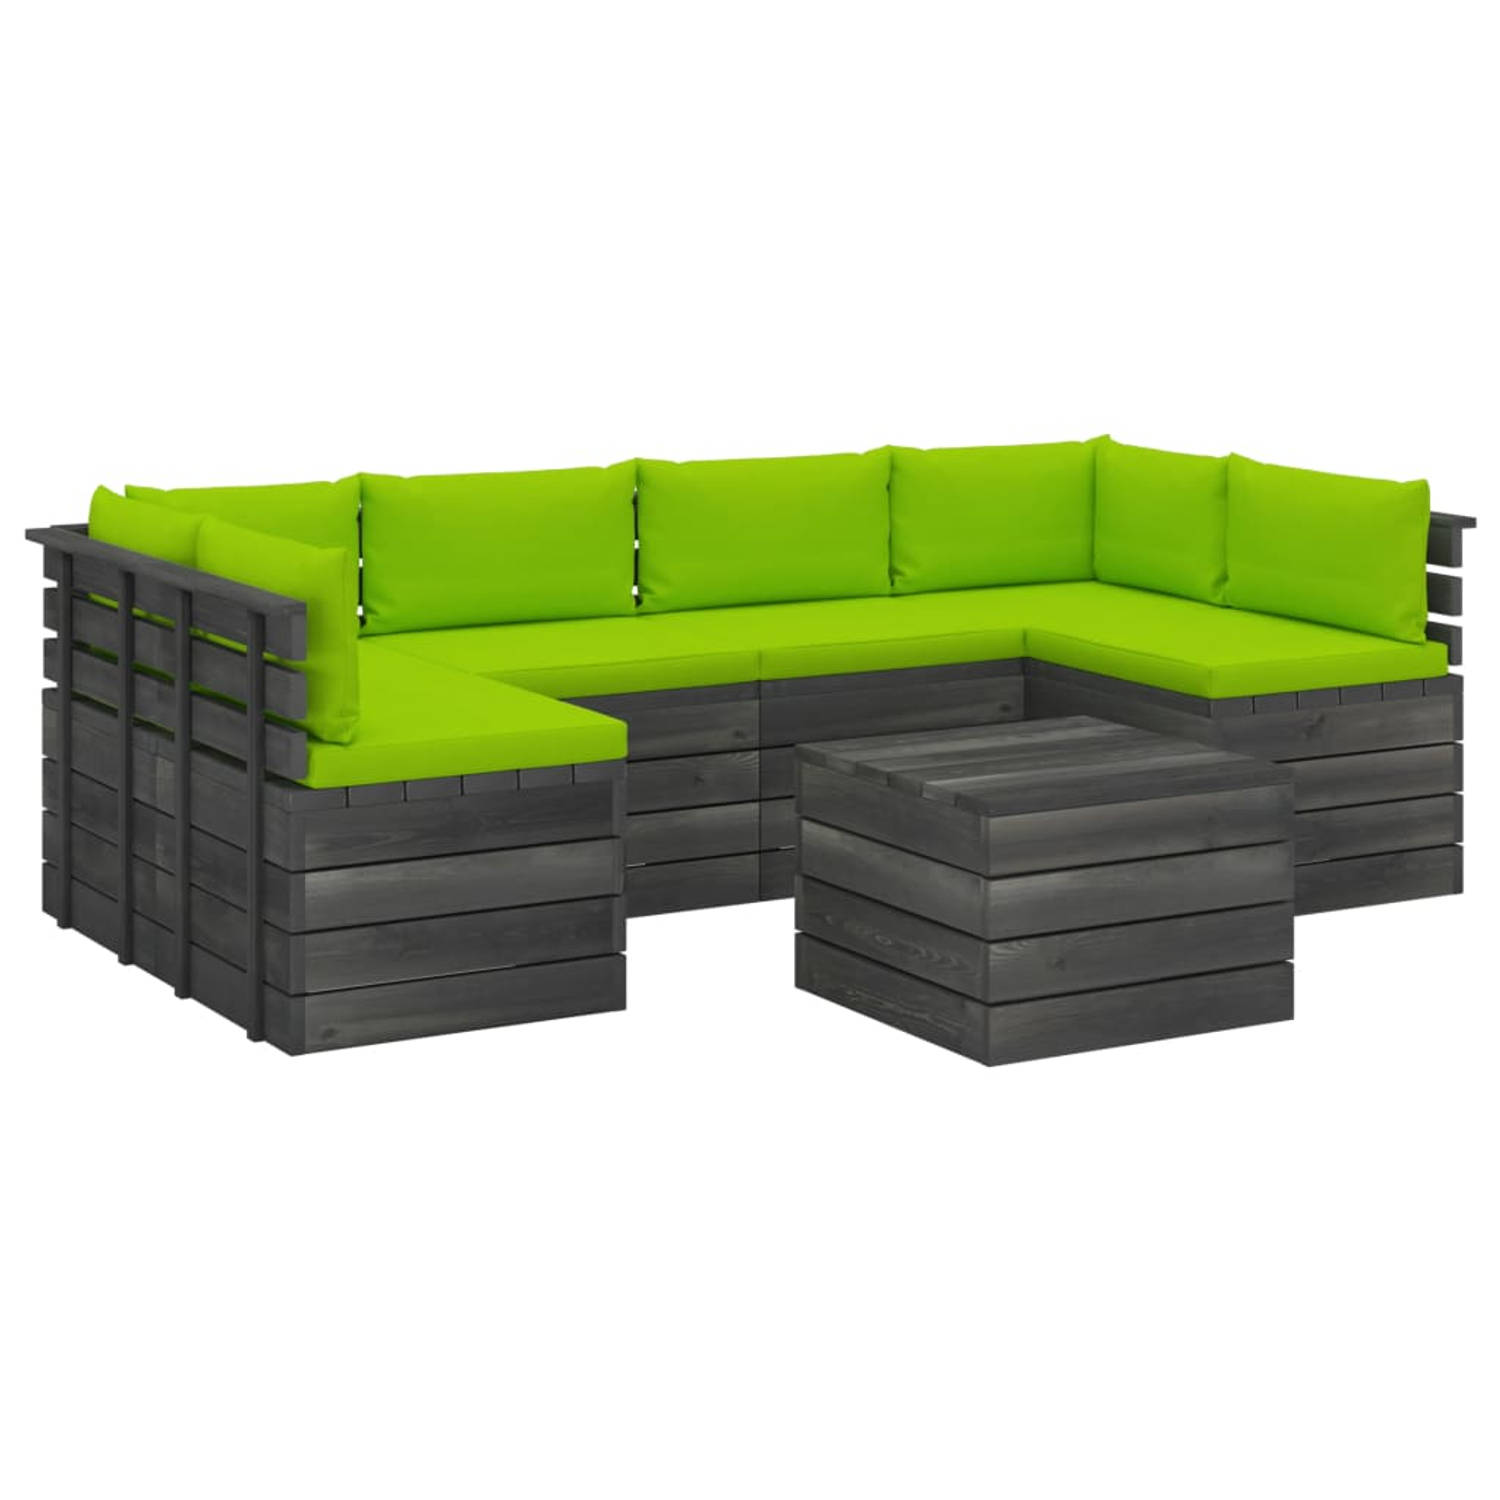 The Living Store Pallet Loungeset - Tuinmeubelset - Hout - 8 kussens - Grenenhout - 60 x 65 x 71.5 cm